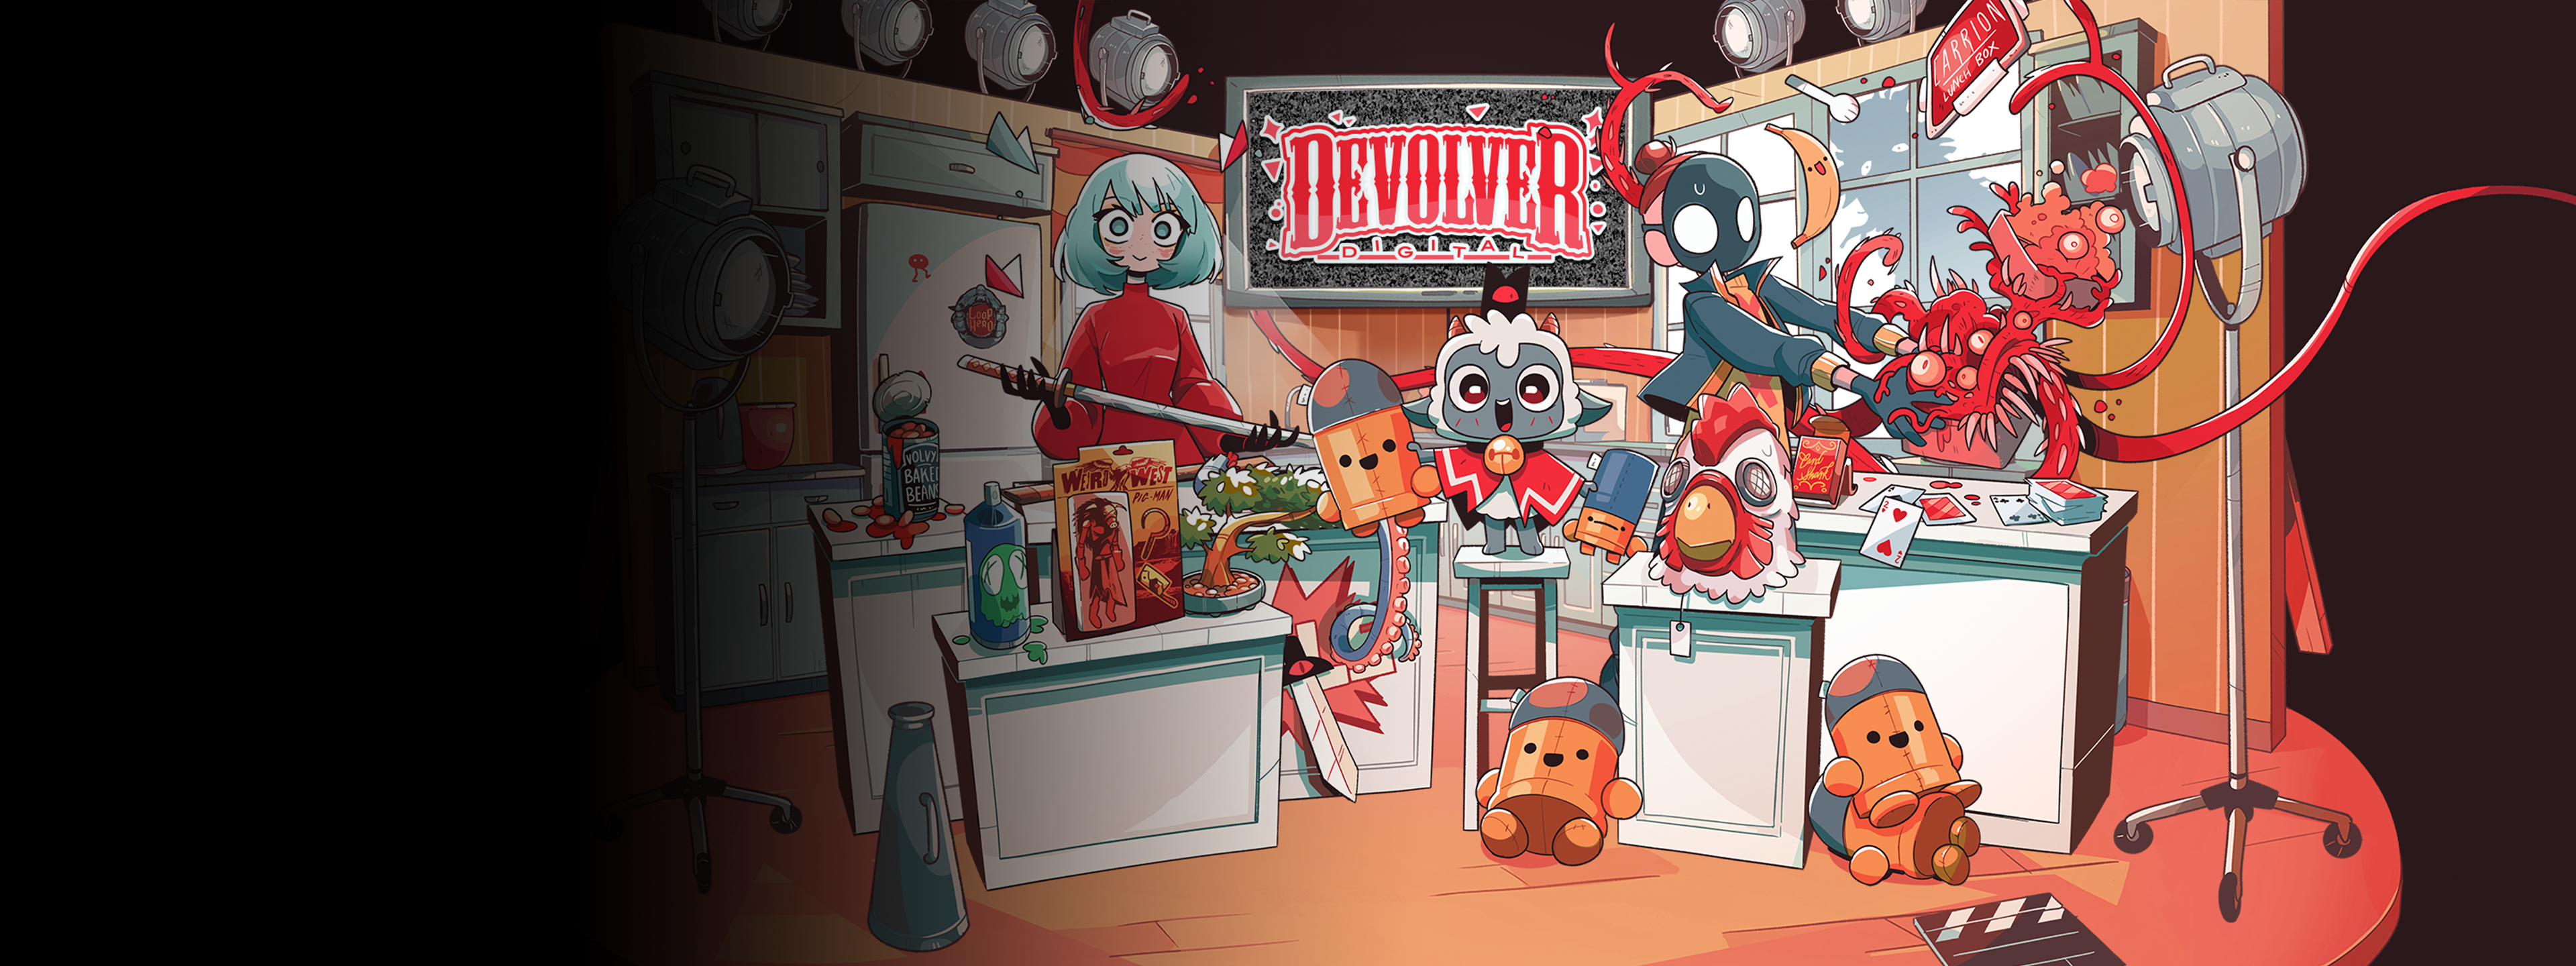 Diner, Cat Game - The Cat Collector! Wiki